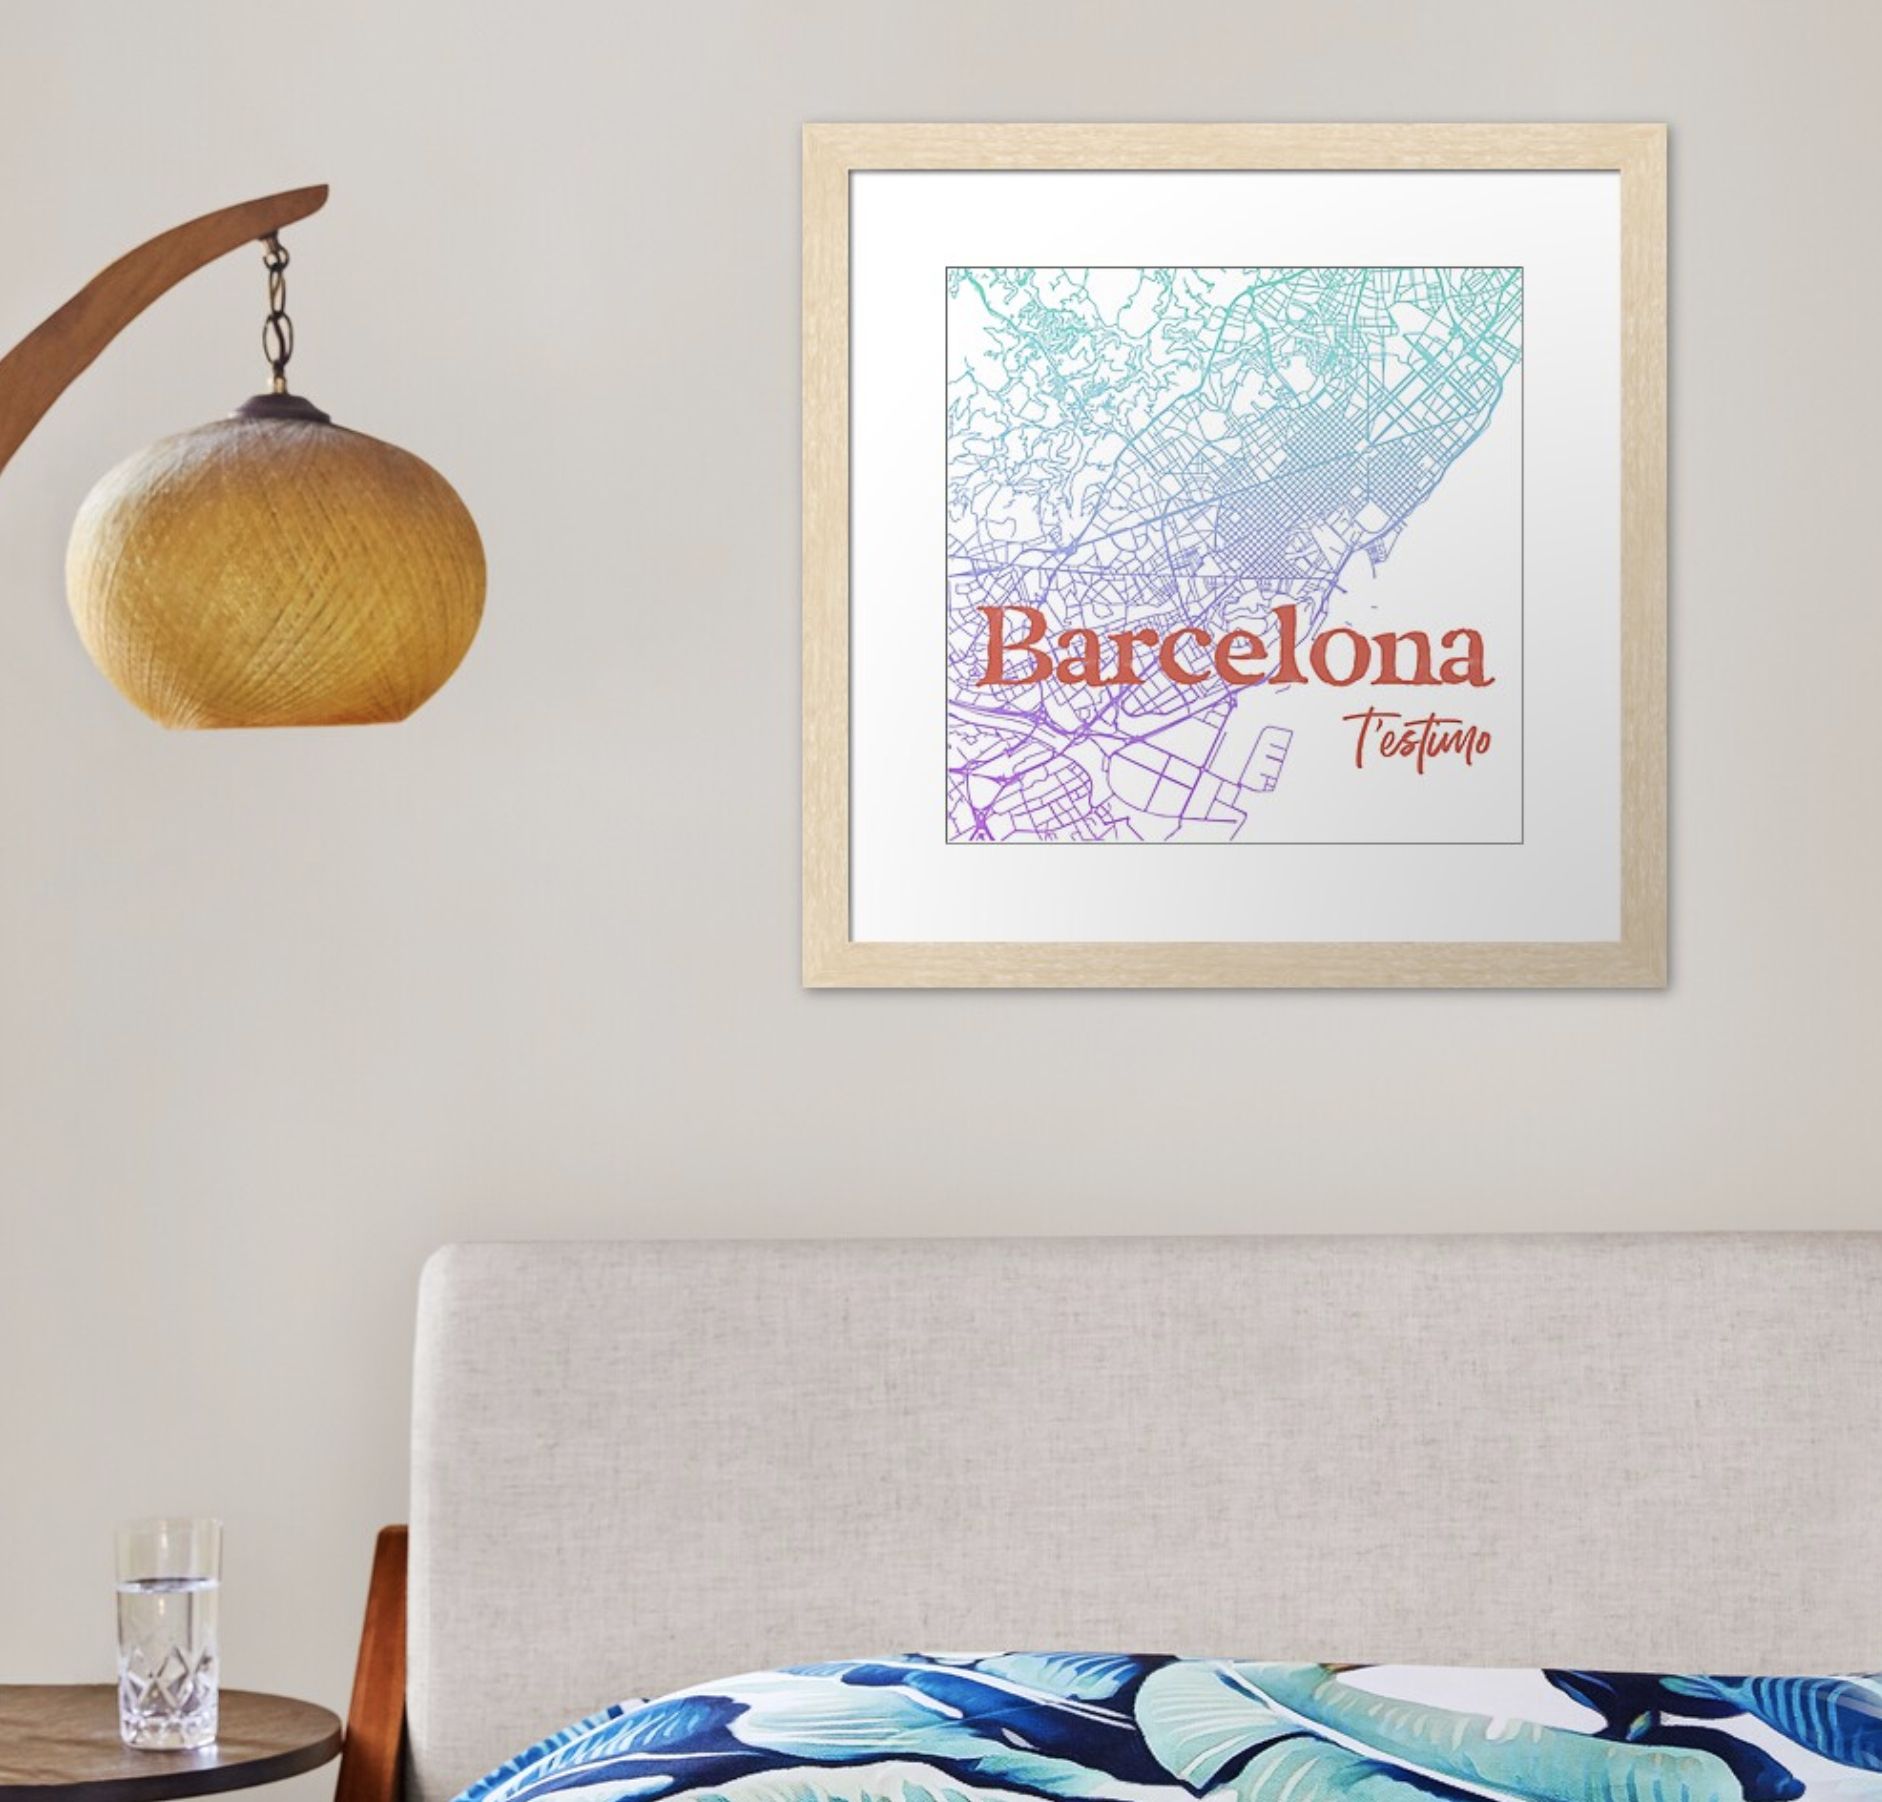 Barcelona T'estimo, I Love You In Catalan, Spain Souvenir With Barcelona Framed Art Prints (View 4 of 15)